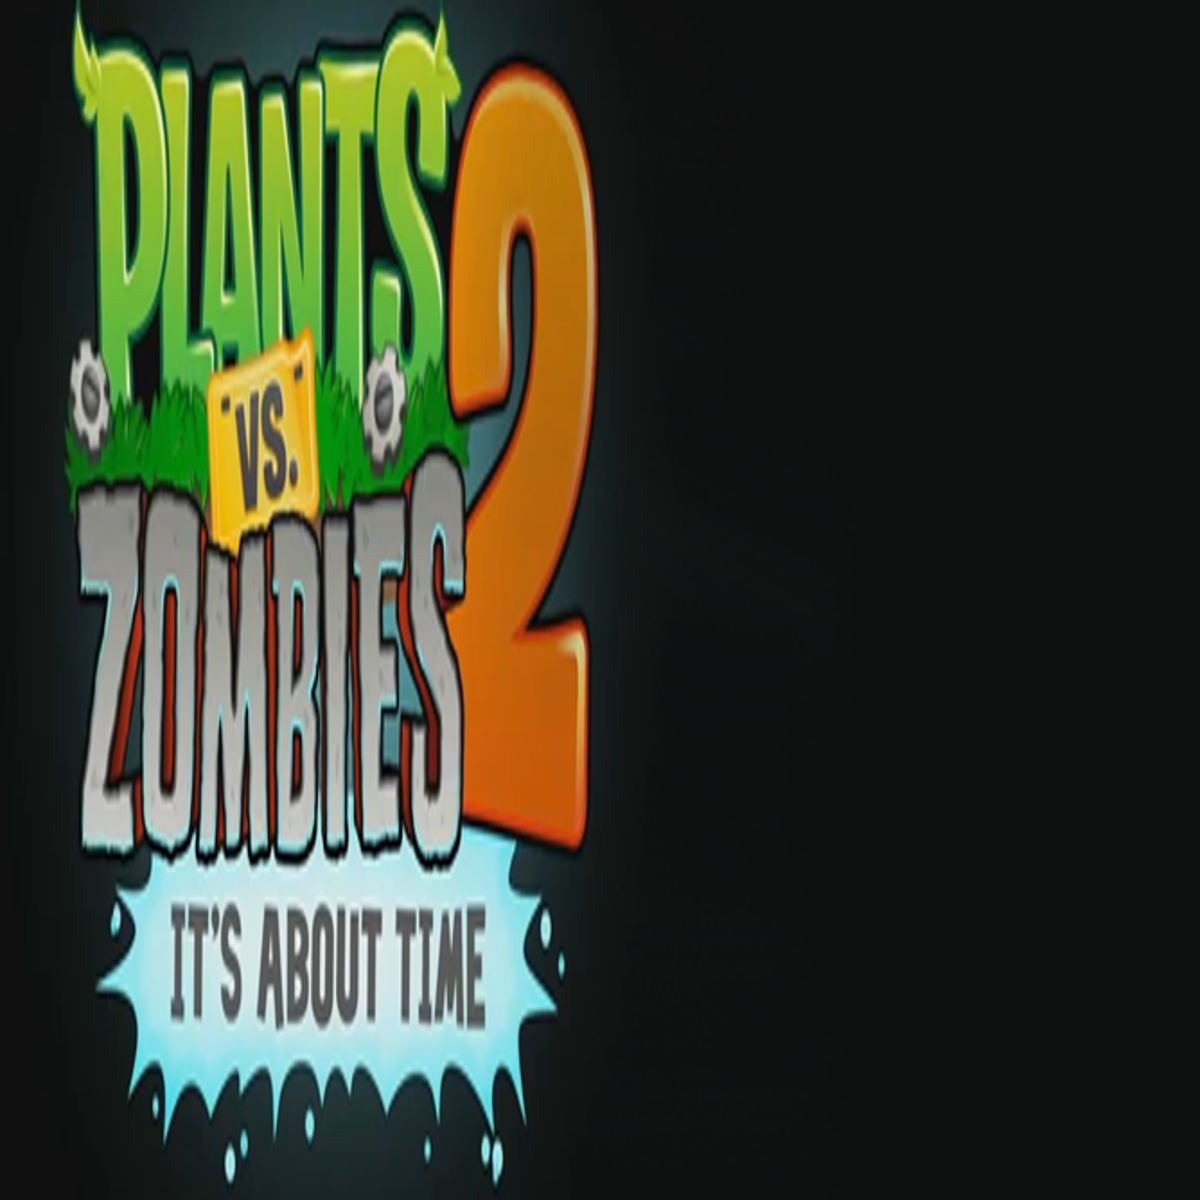 Plants vs Zombies free on iTunes App Store for iPhone and iPad - Polygon